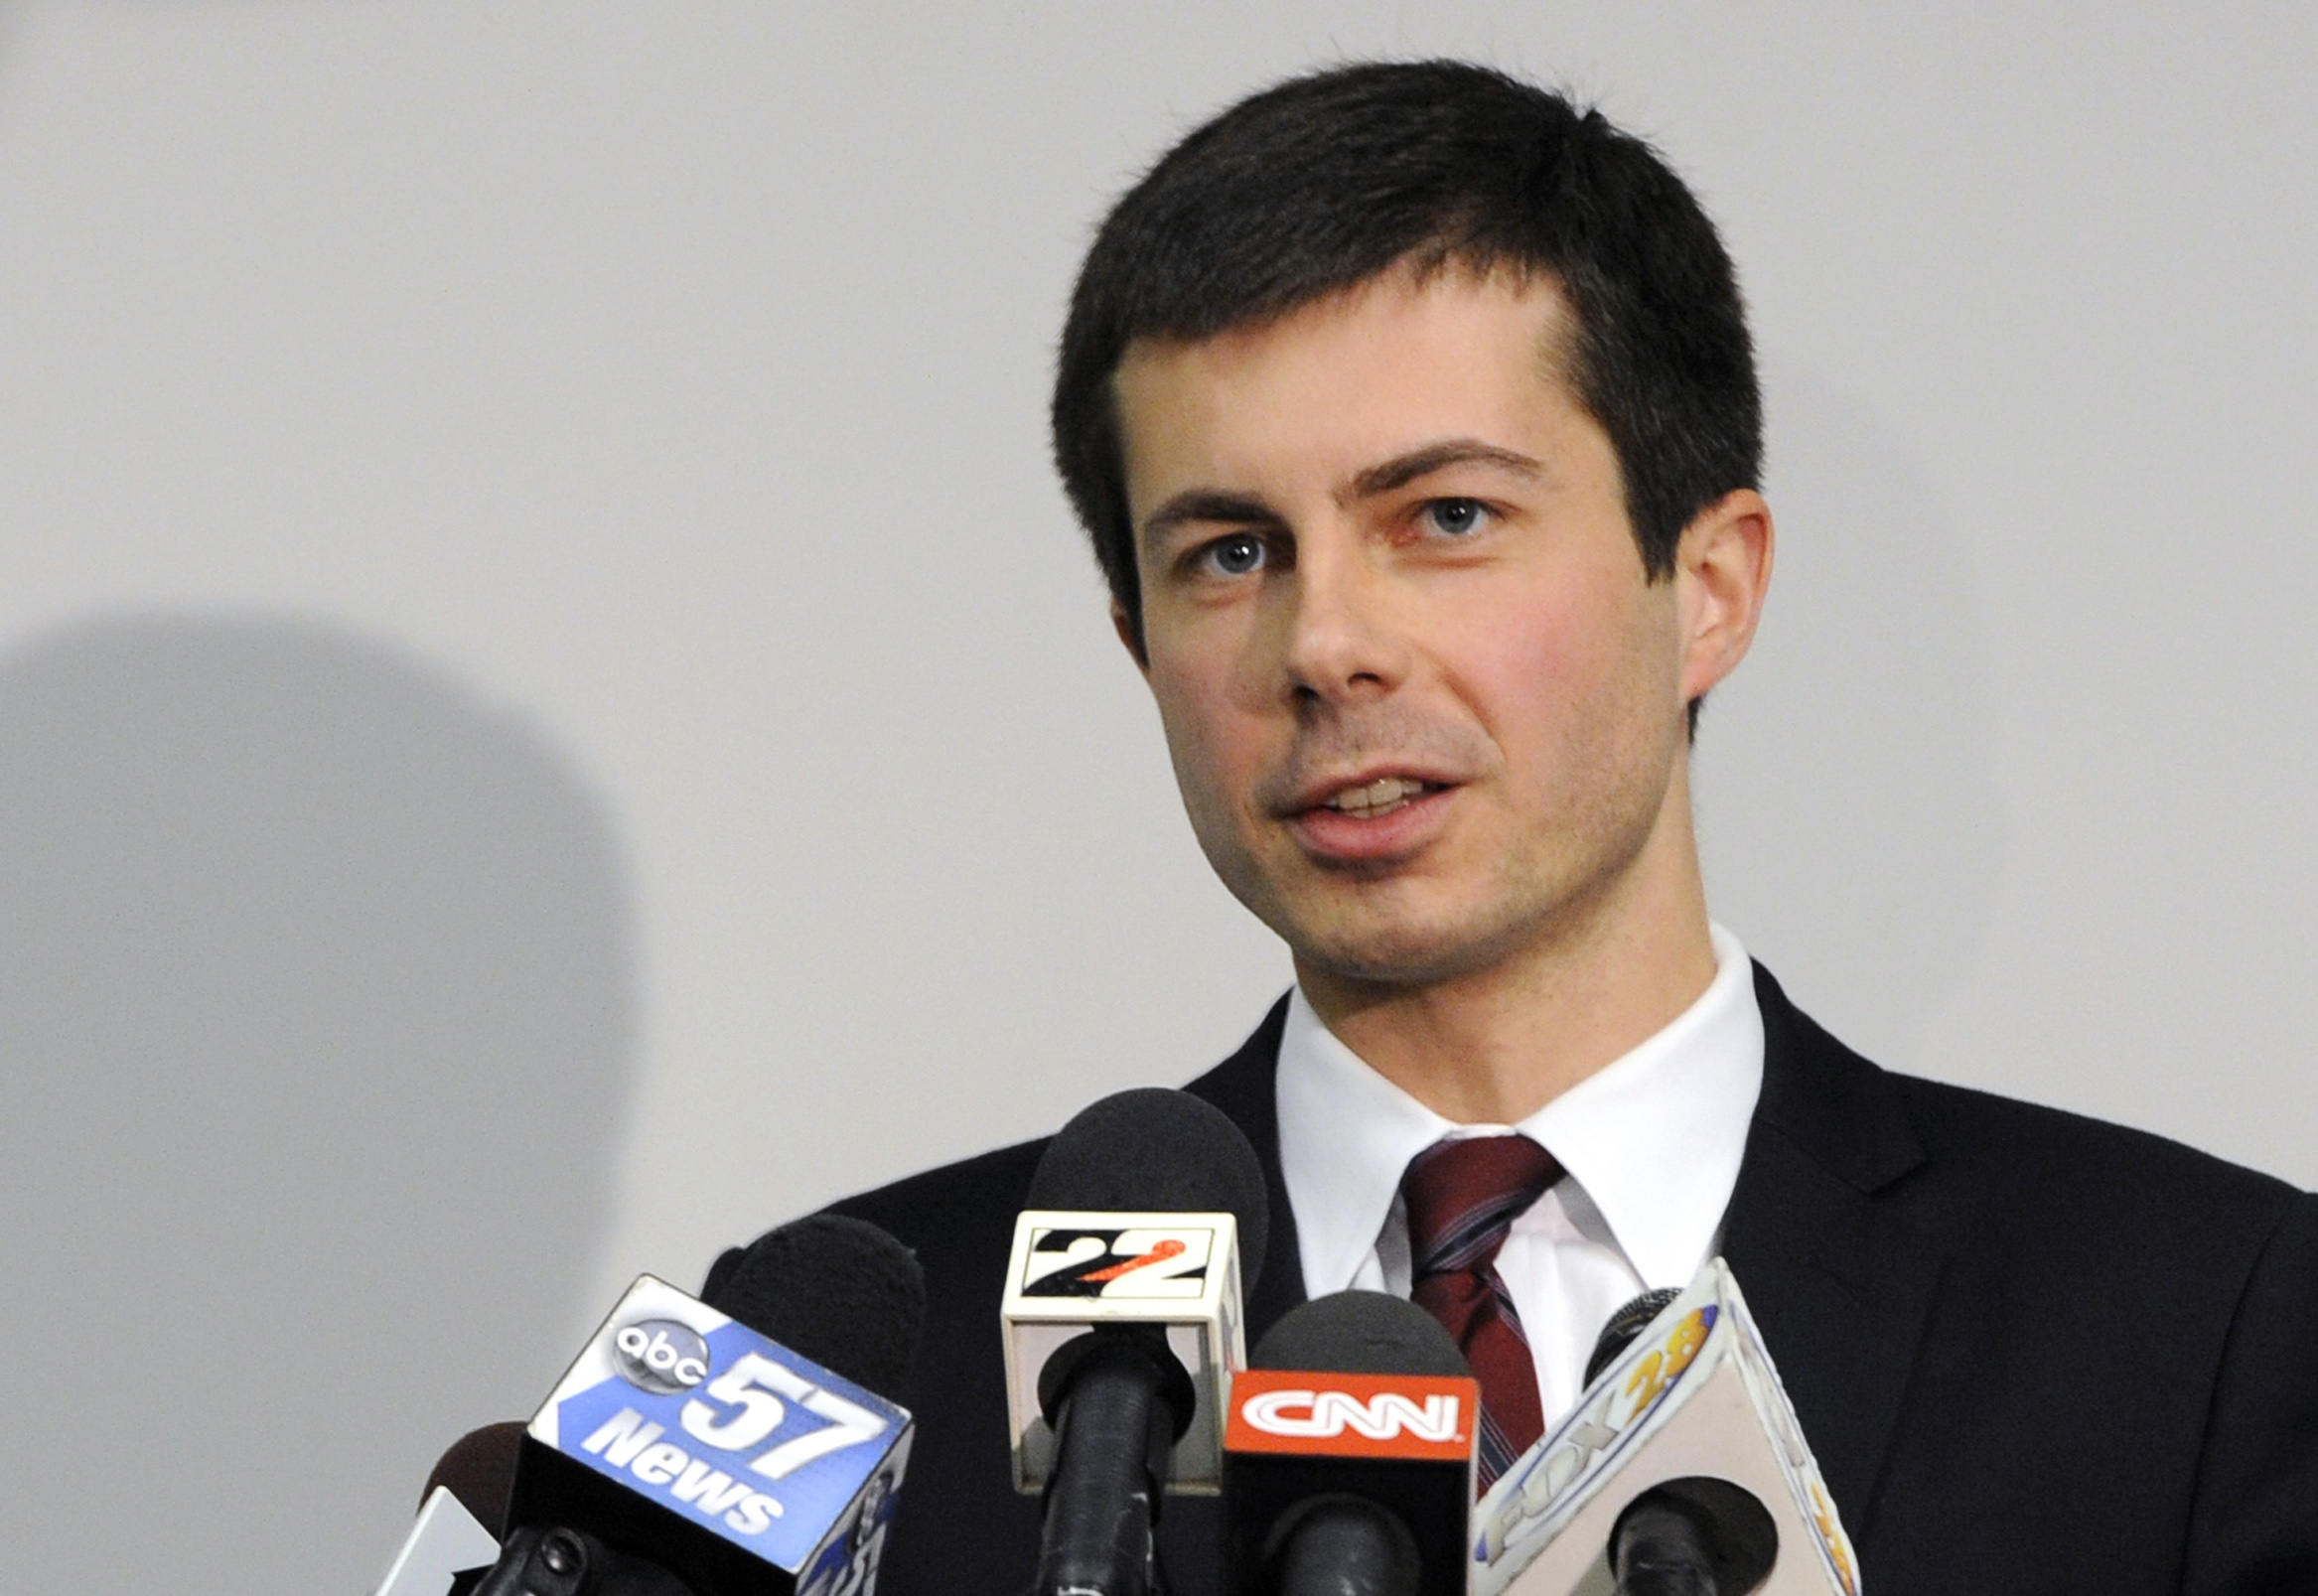 South Bend Mayor Pete Buttigieg came out as gay in an essay published on Tuesday, June 16, 2015,  in the South Bend Tribune. (Joe Raymond—FILE/AP)